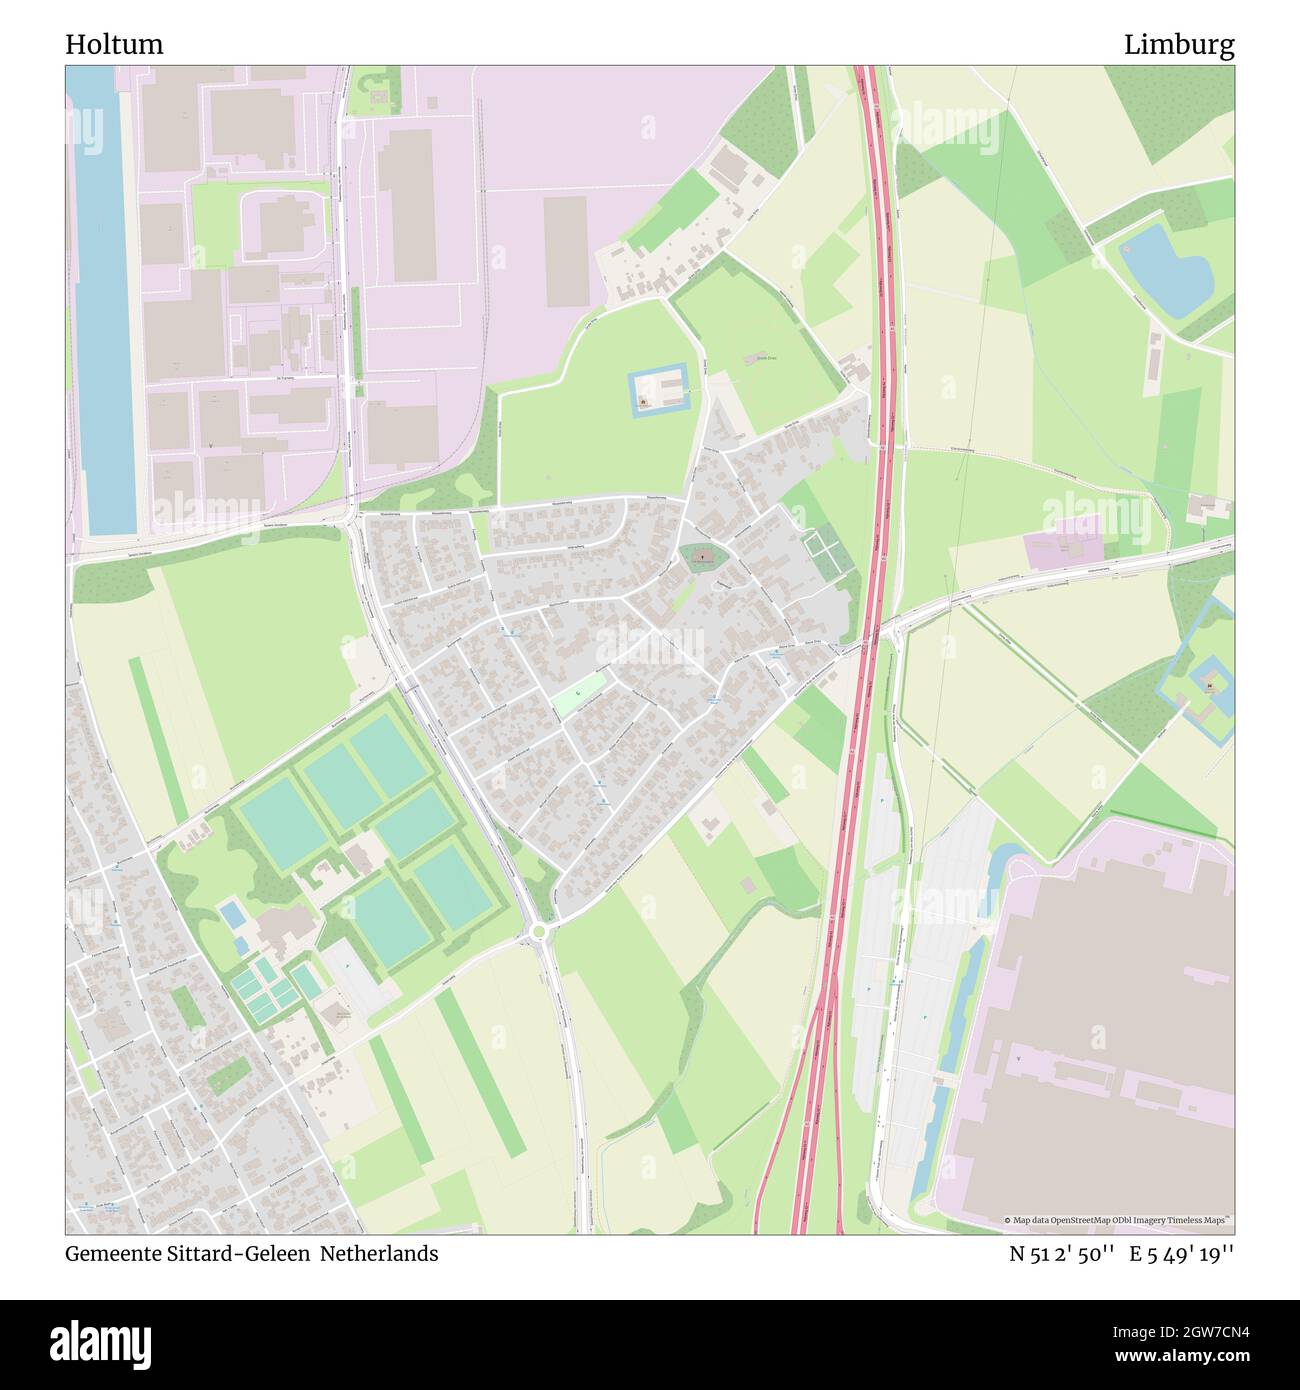 Holtum, Gemeente Sittard-Geleen, Netherlands, Limburg, N 51 2' 50'', E 5 49' 19'', map, Timeless Map published in 2021. Travelers, explorers and adventurers like Florence Nightingale, David Livingstone, Ernest Shackleton, Lewis and Clark and Sherlock Holmes relied on maps to plan travels to the world's most remote corners, Timeless Maps is mapping most locations on the globe, showing the achievement of great dreams Stock Photo